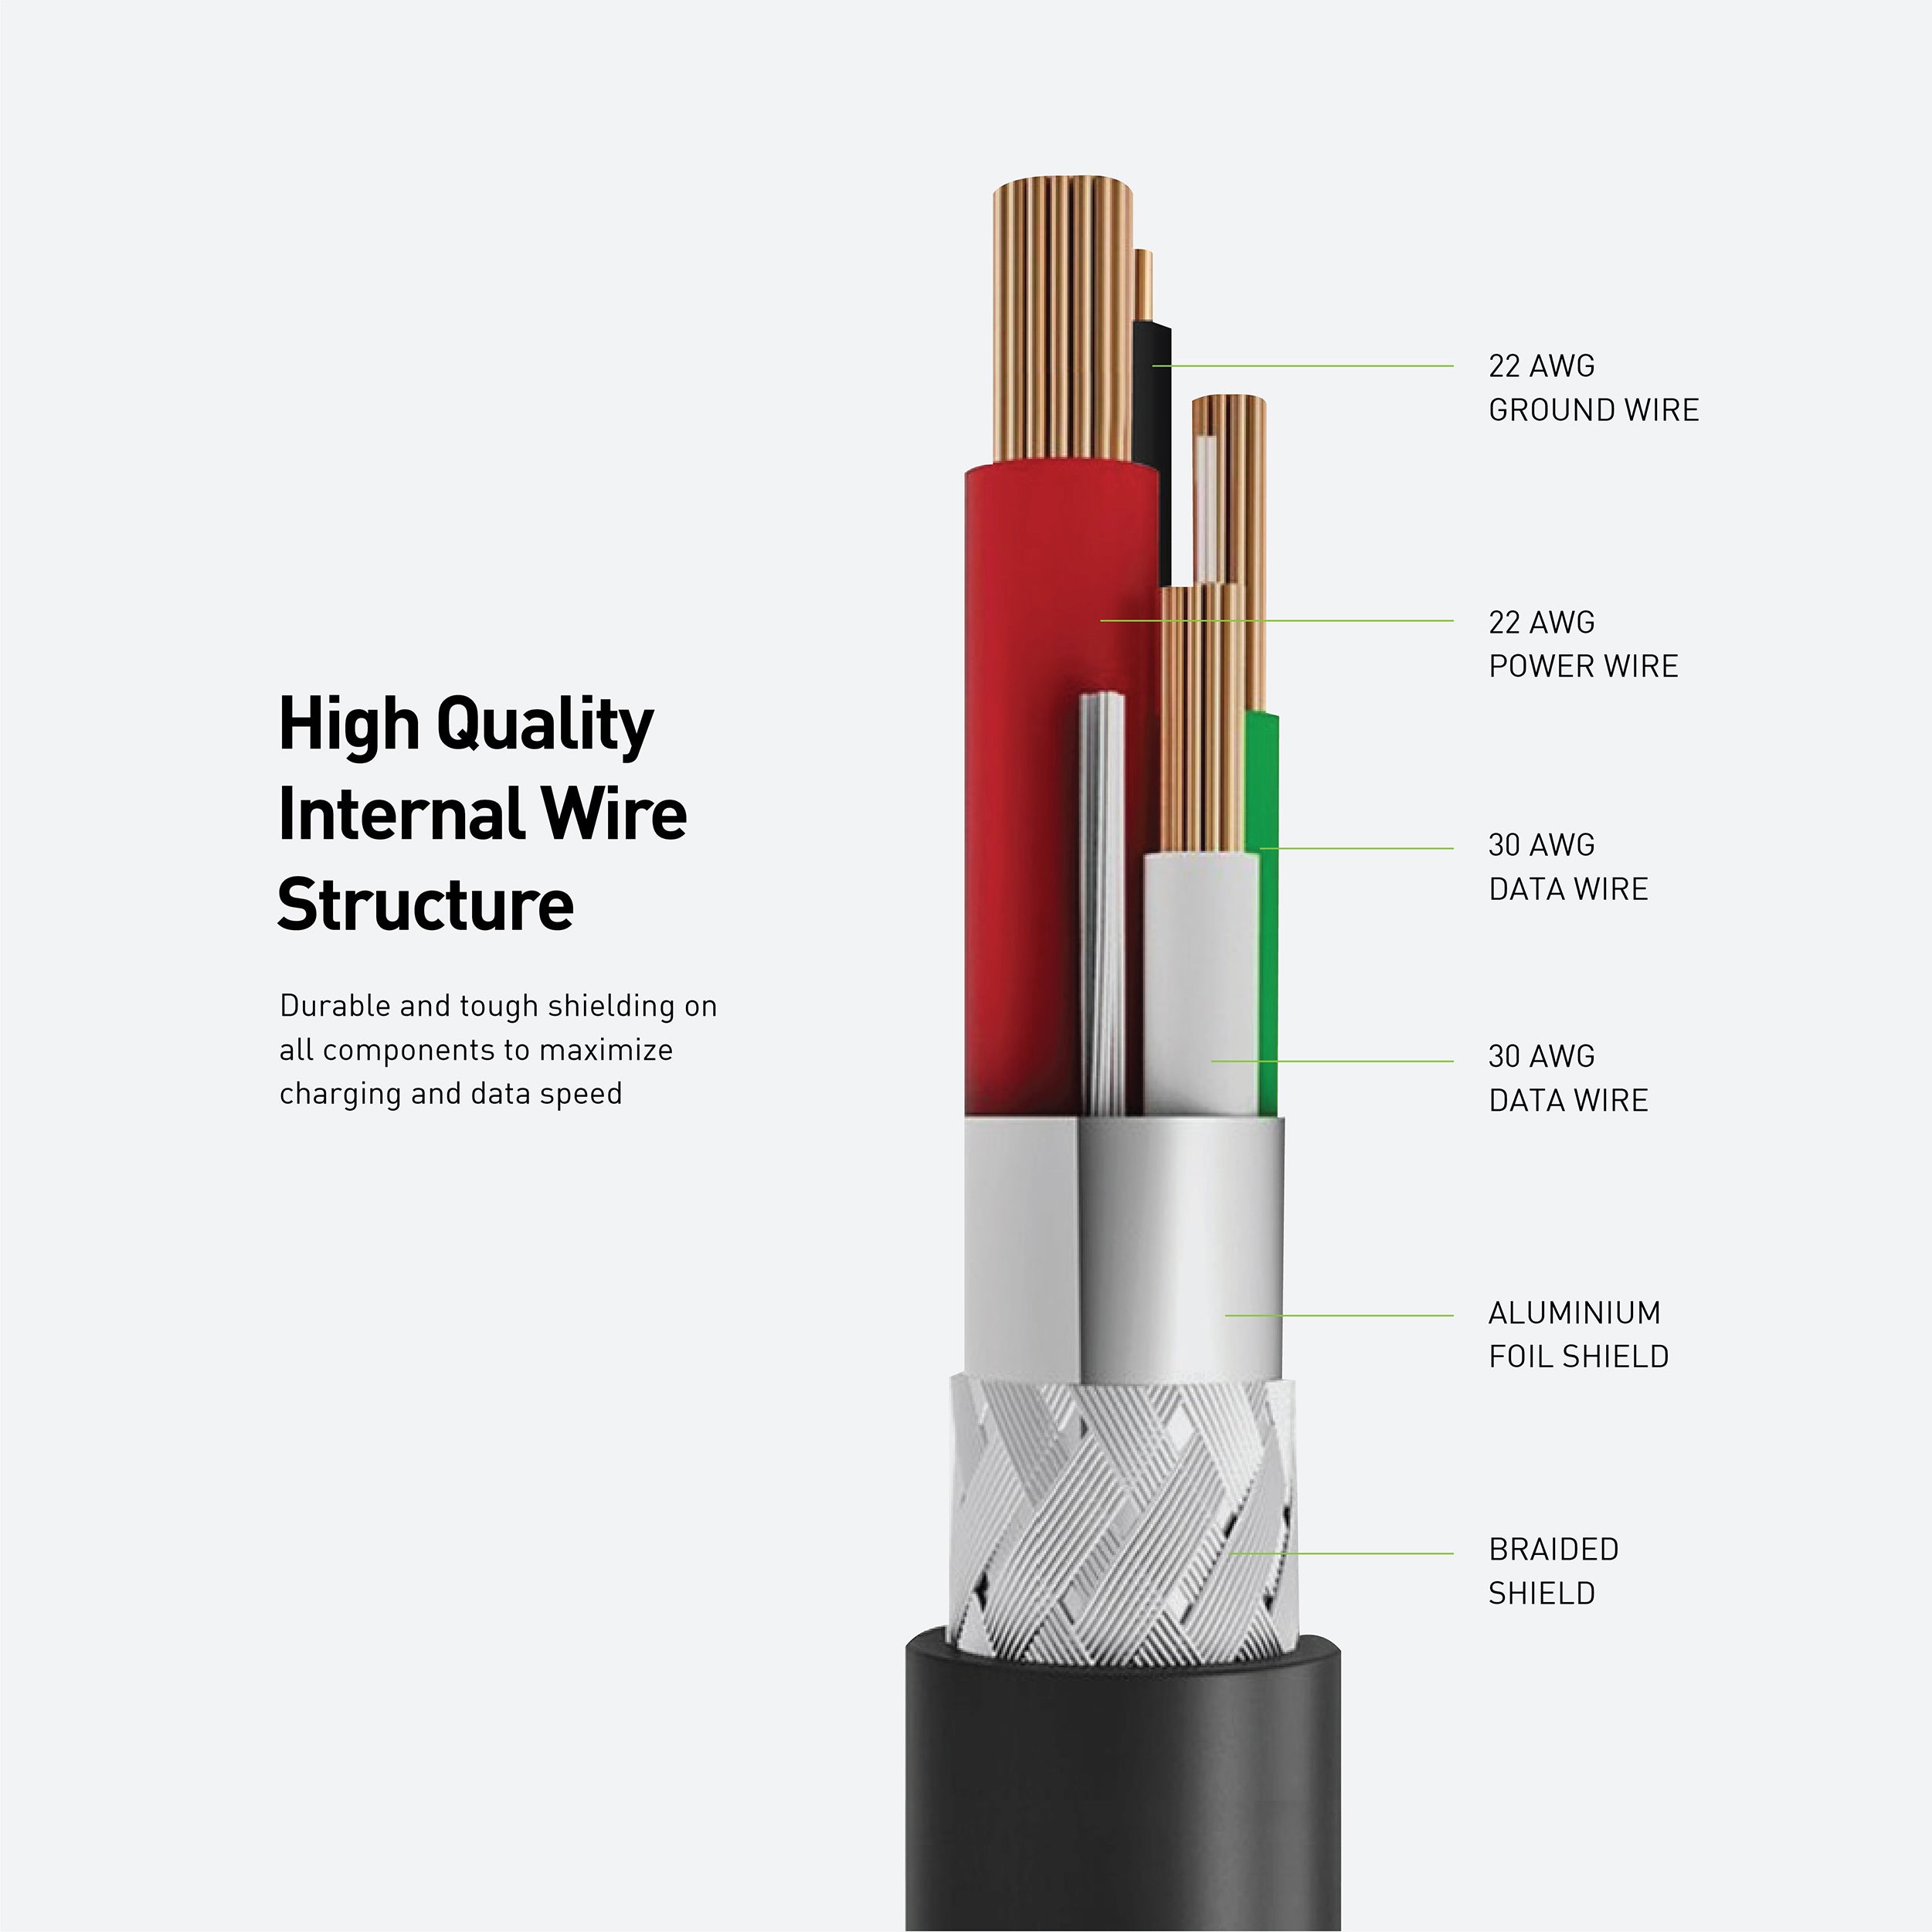 High-quality internal wire structure of FibraTough USB-C cable